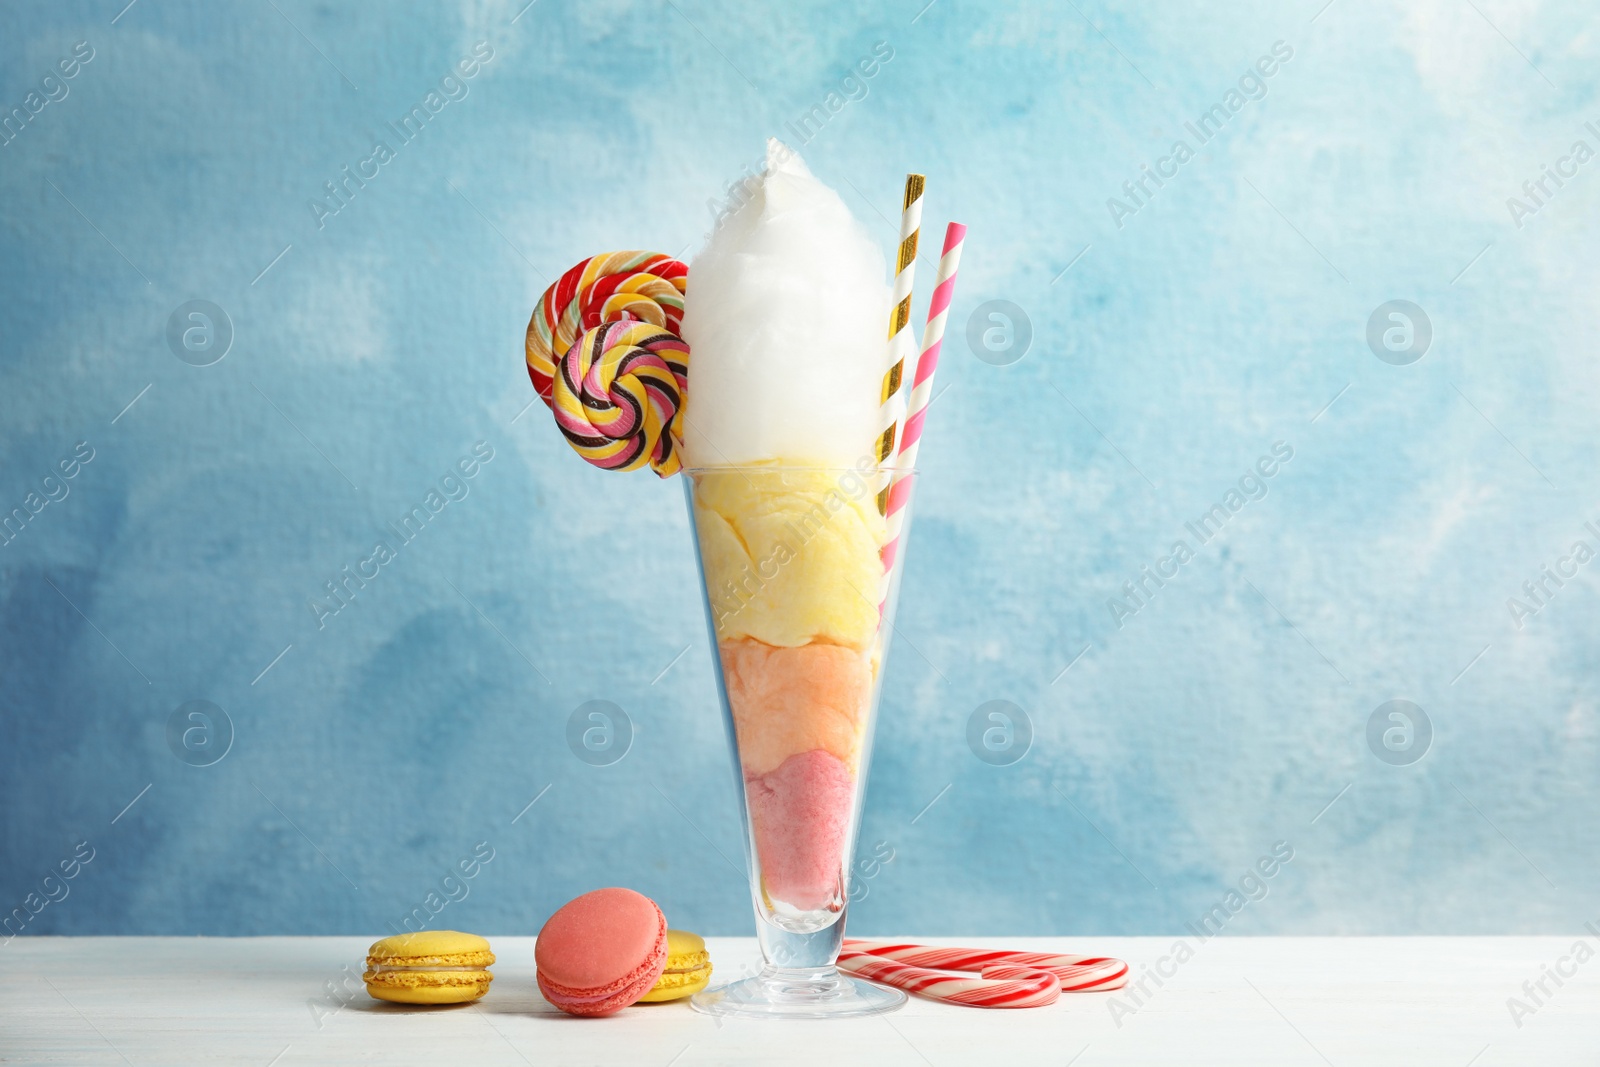 Photo of Yummy cotton candy in glass served with sweets on table